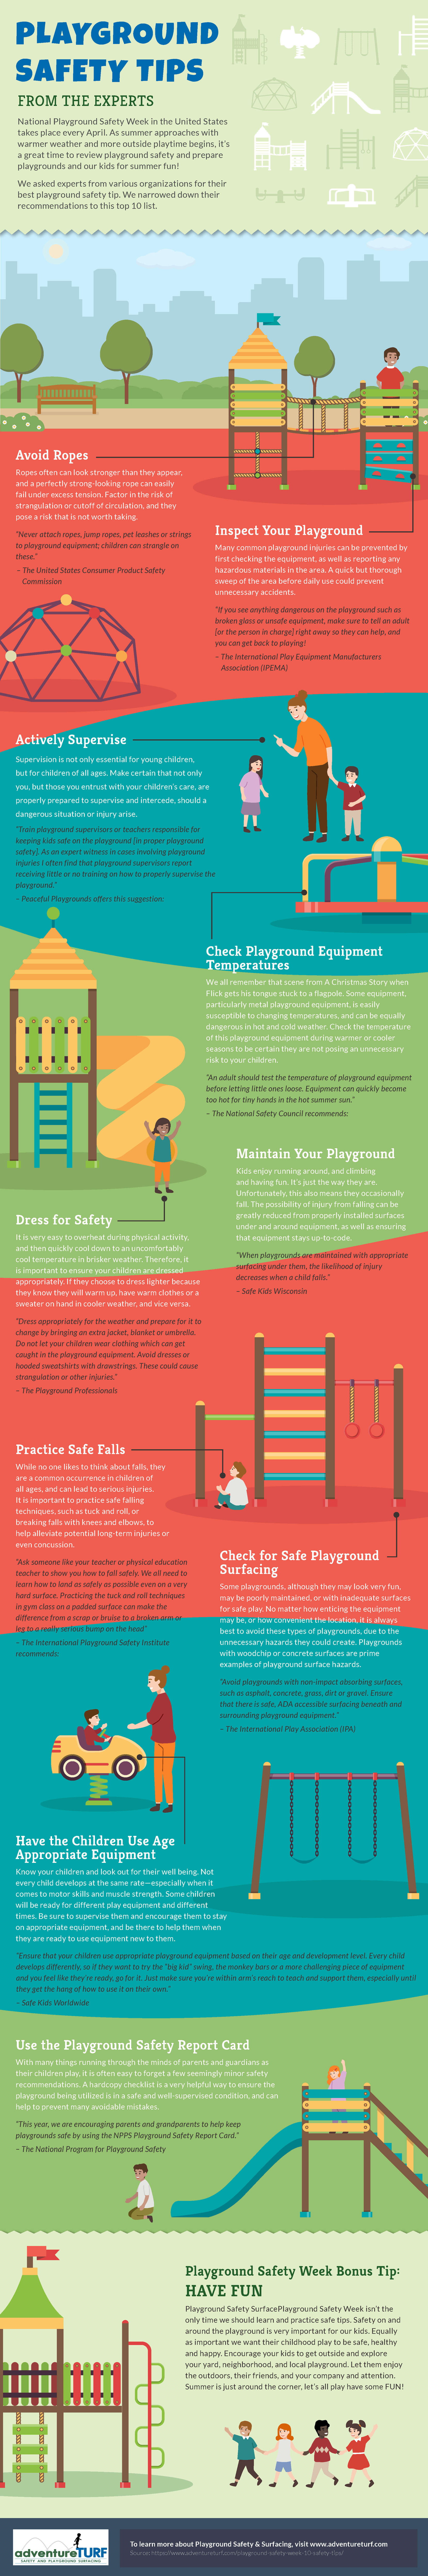 Safety Week Top 10 Playground Safety Tips from the Experts